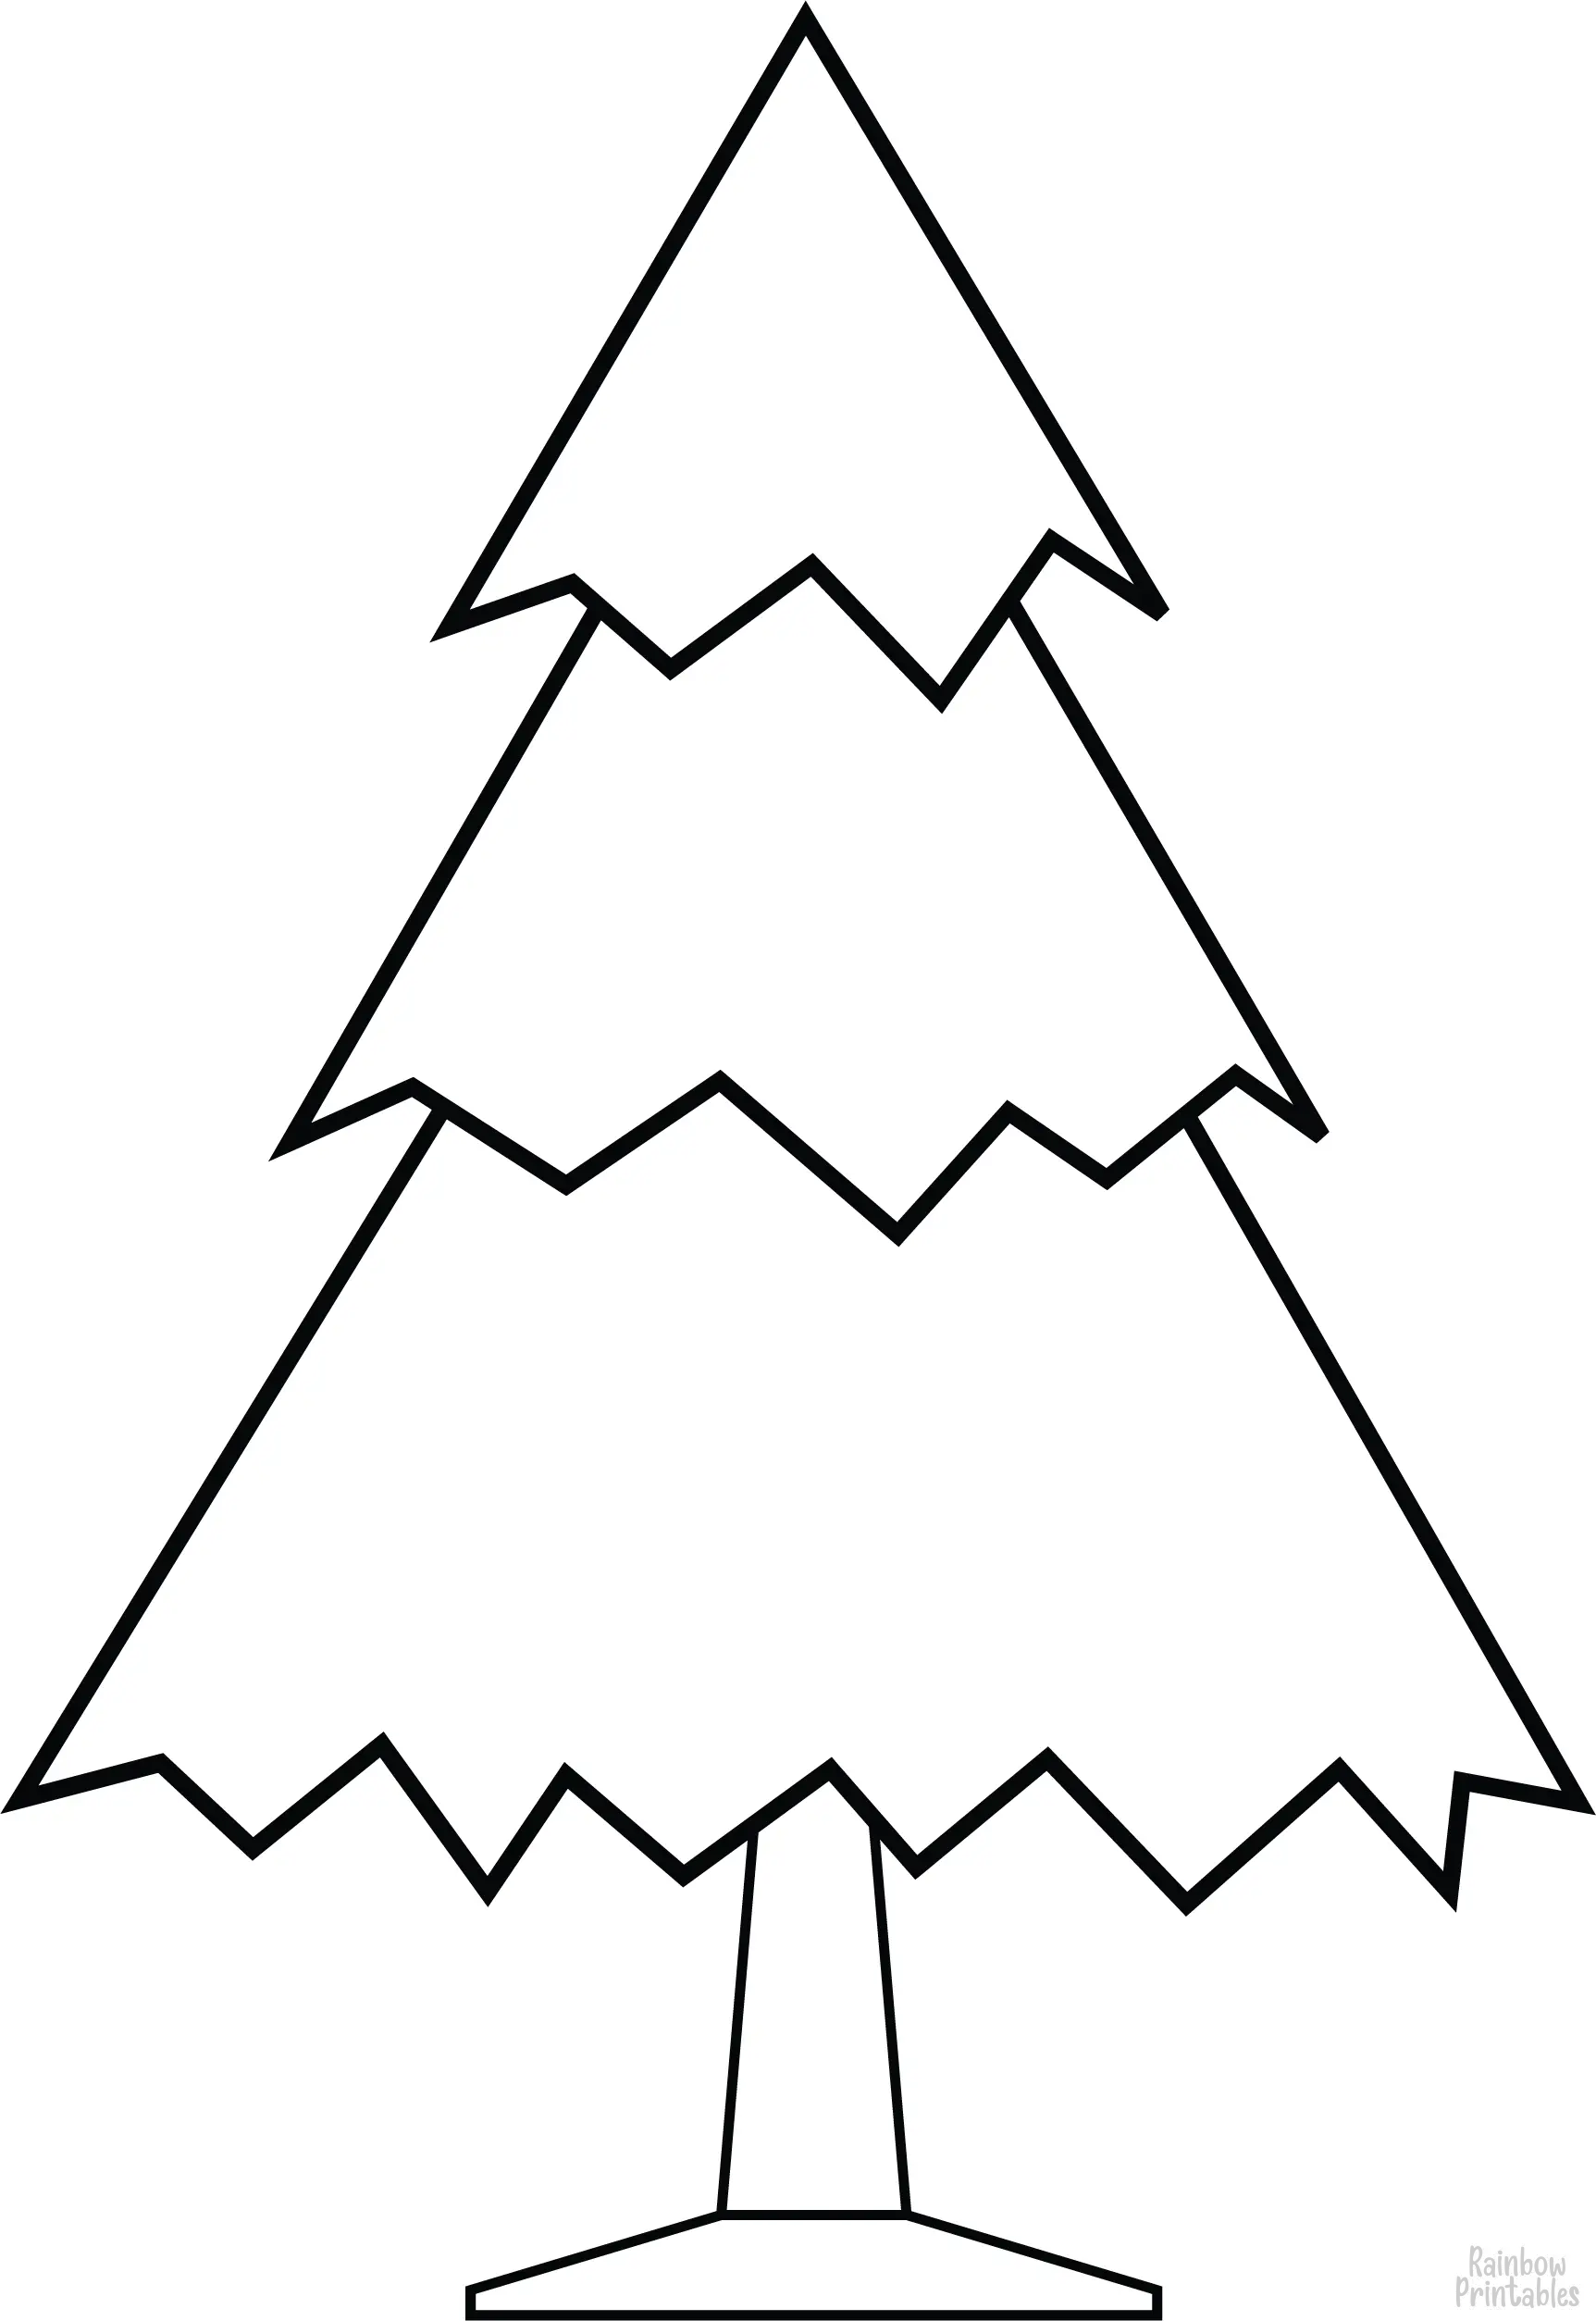 Bare Empty Undecorated Holiday Tree Coloring Page Christmas Xmas Coloring Activities for Kids